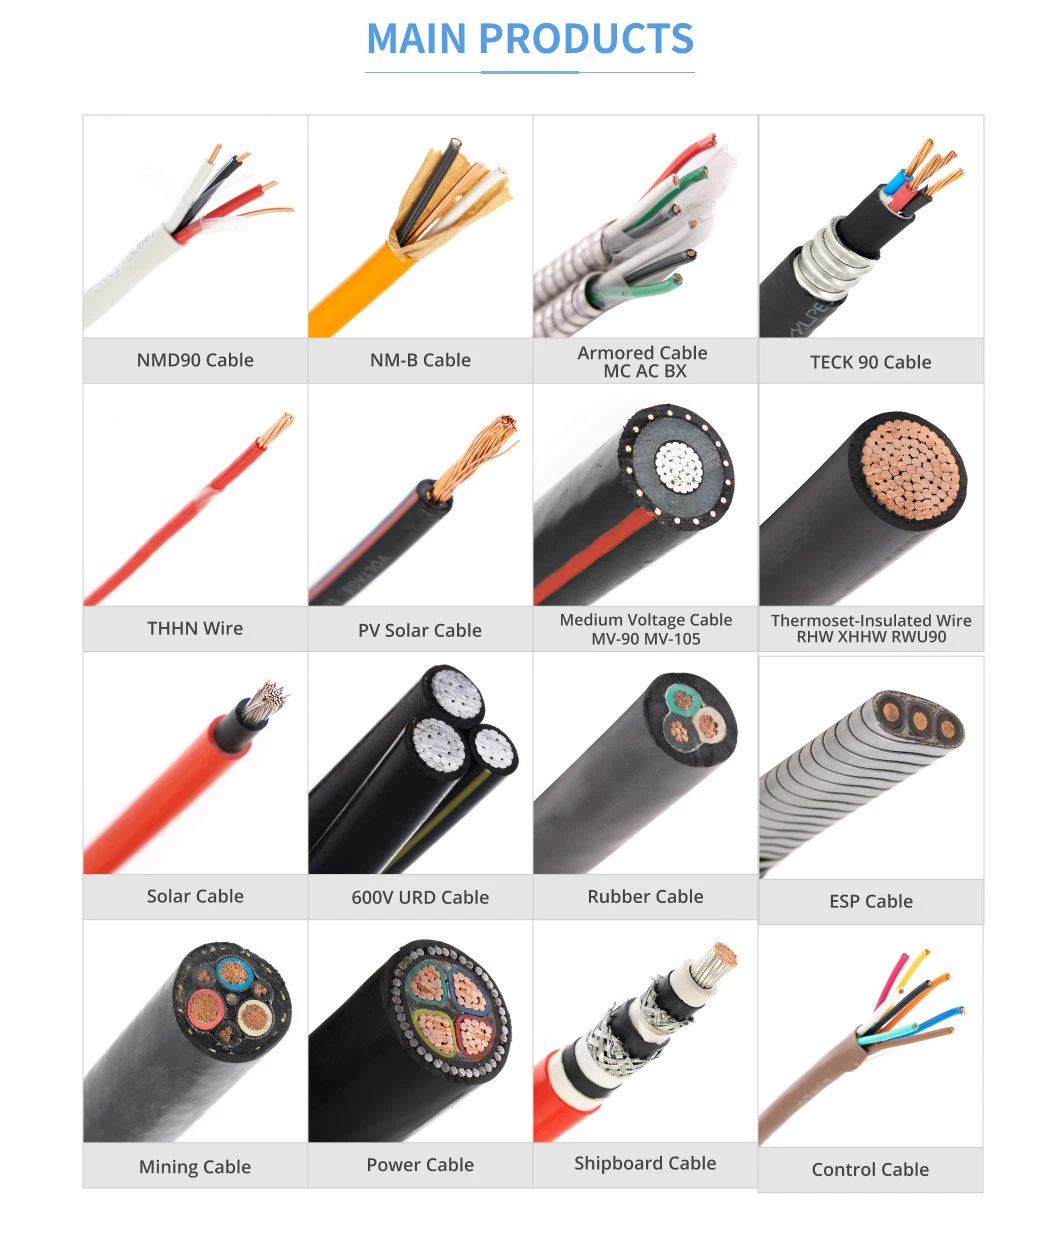 Rvv H05VV-F Cable 2/3/4/5 Core 1.5mm 2.5mm 4mm 6mm 6mm Flexible Cable Copper Wire PVC Insulated Copper Electric Cable Wire